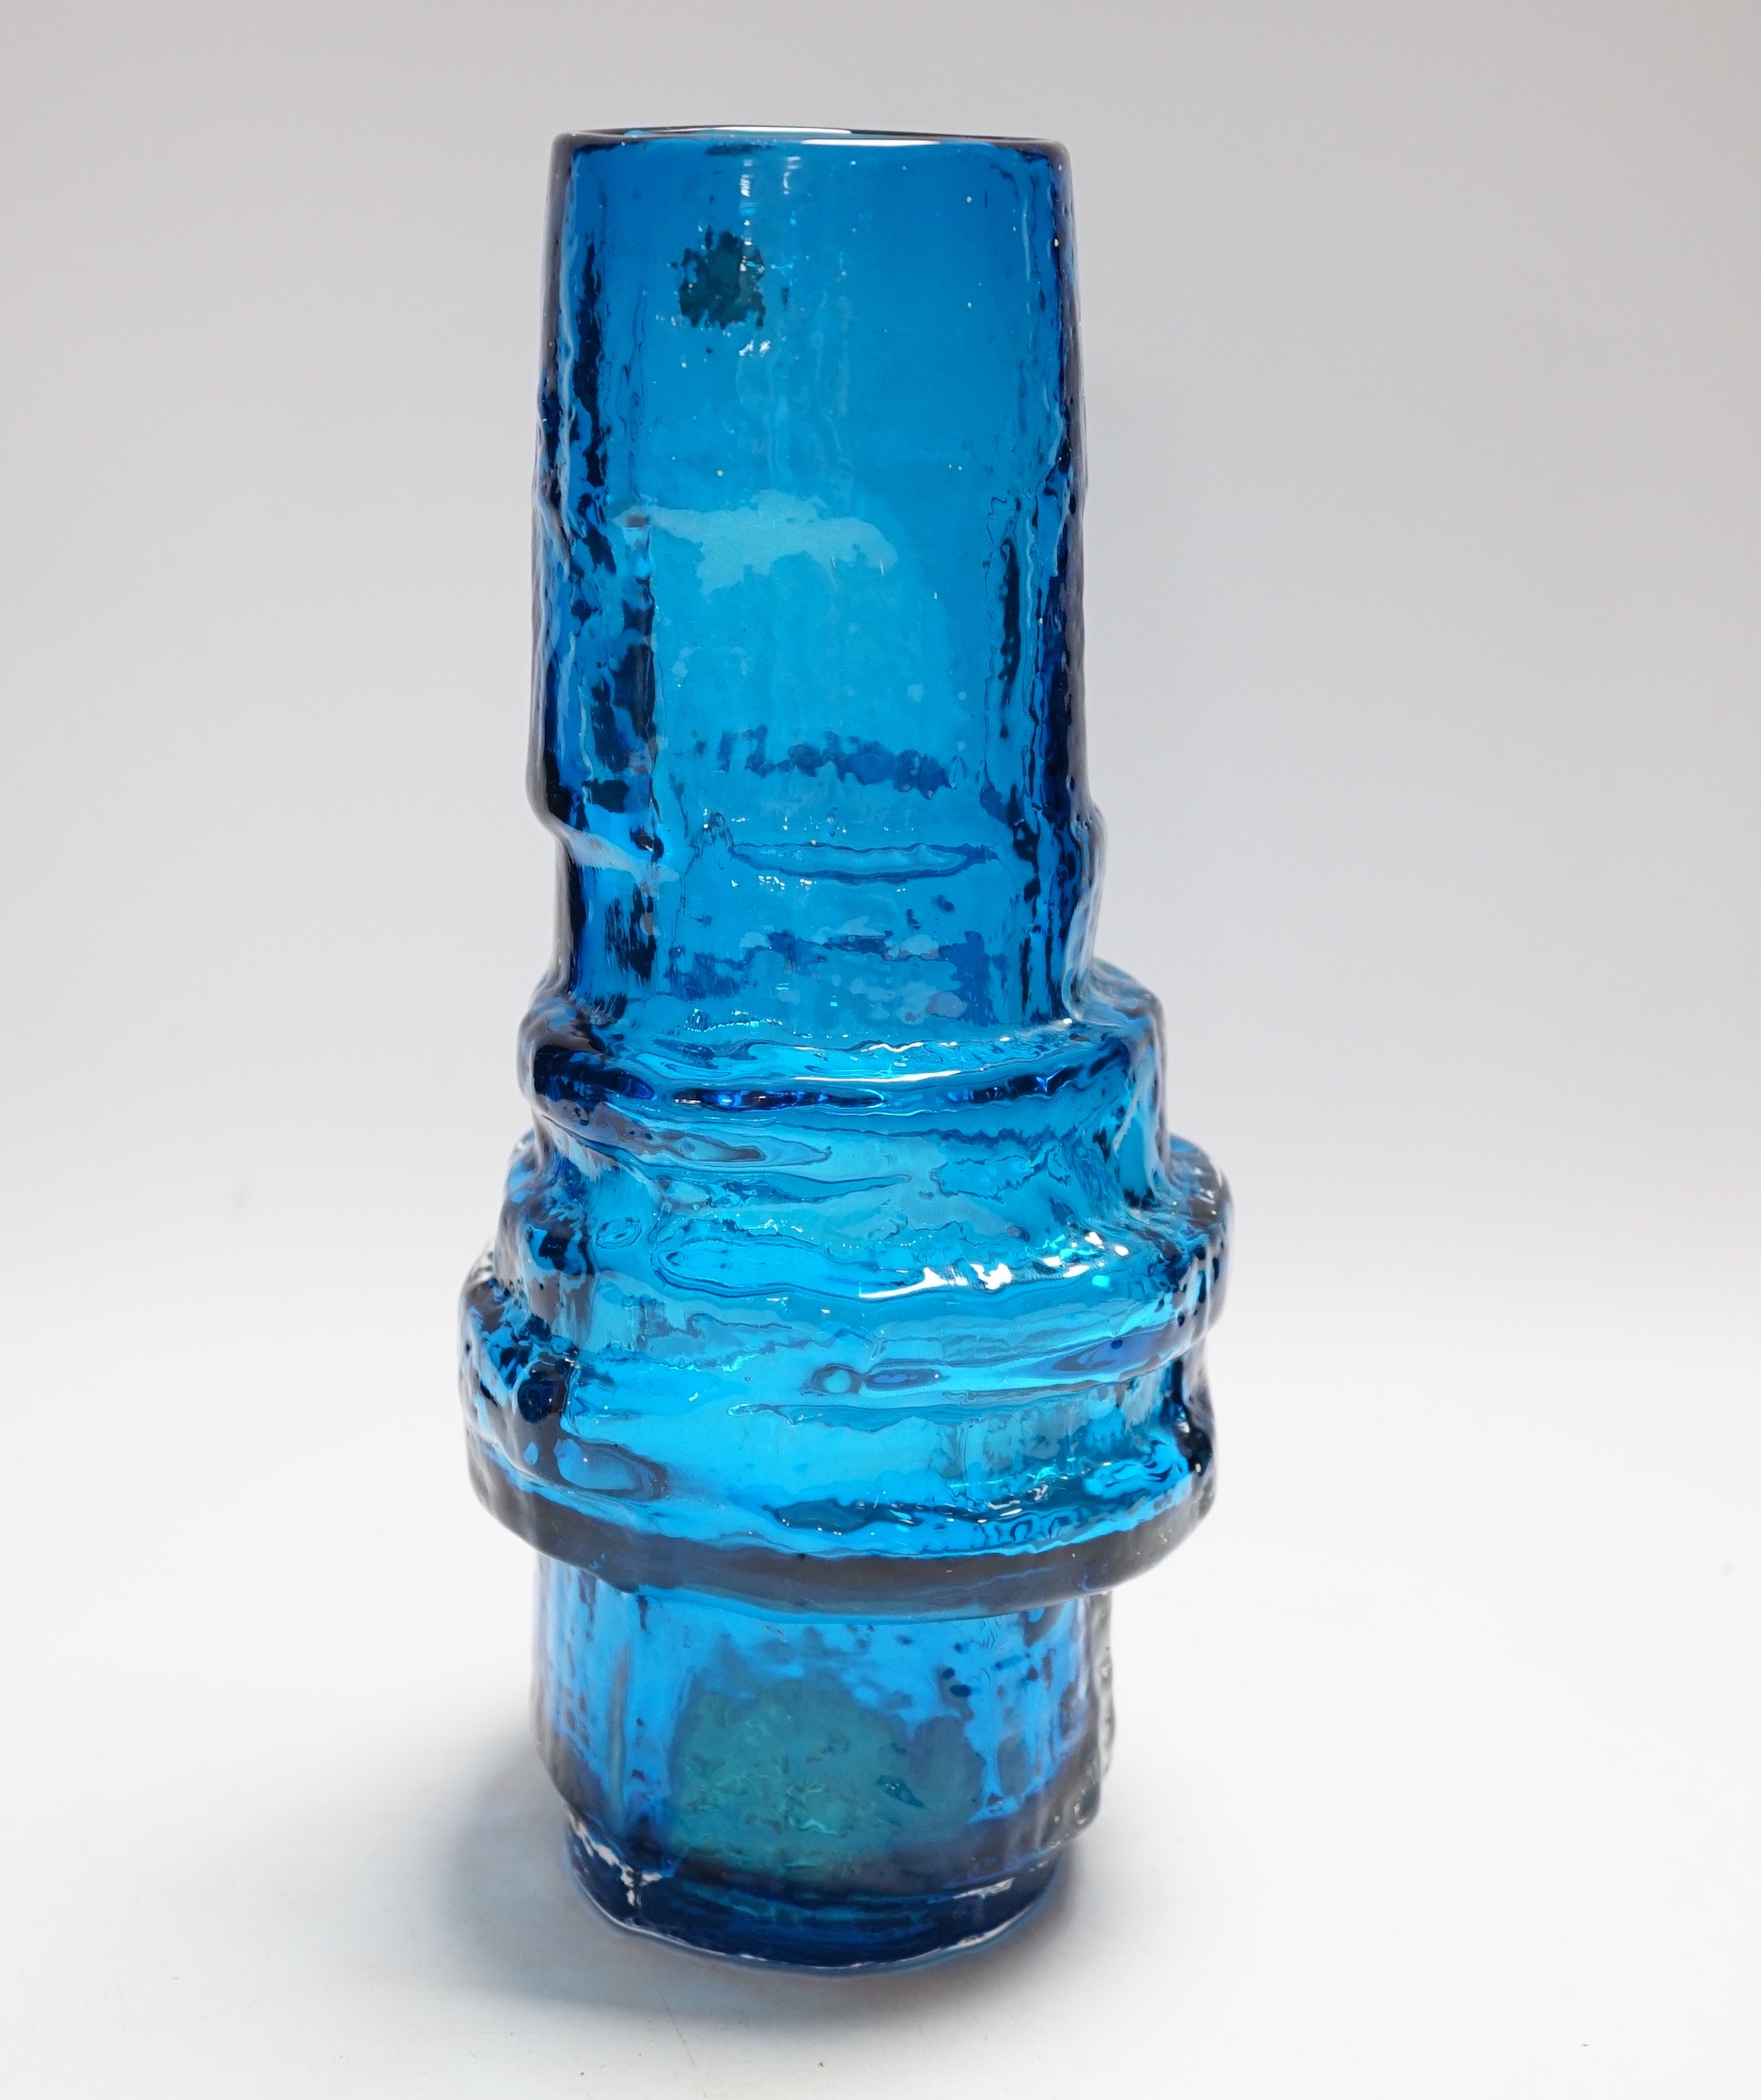 A Whitefriars ‘Hoop’ vase in kingfisher blue, 27cm high